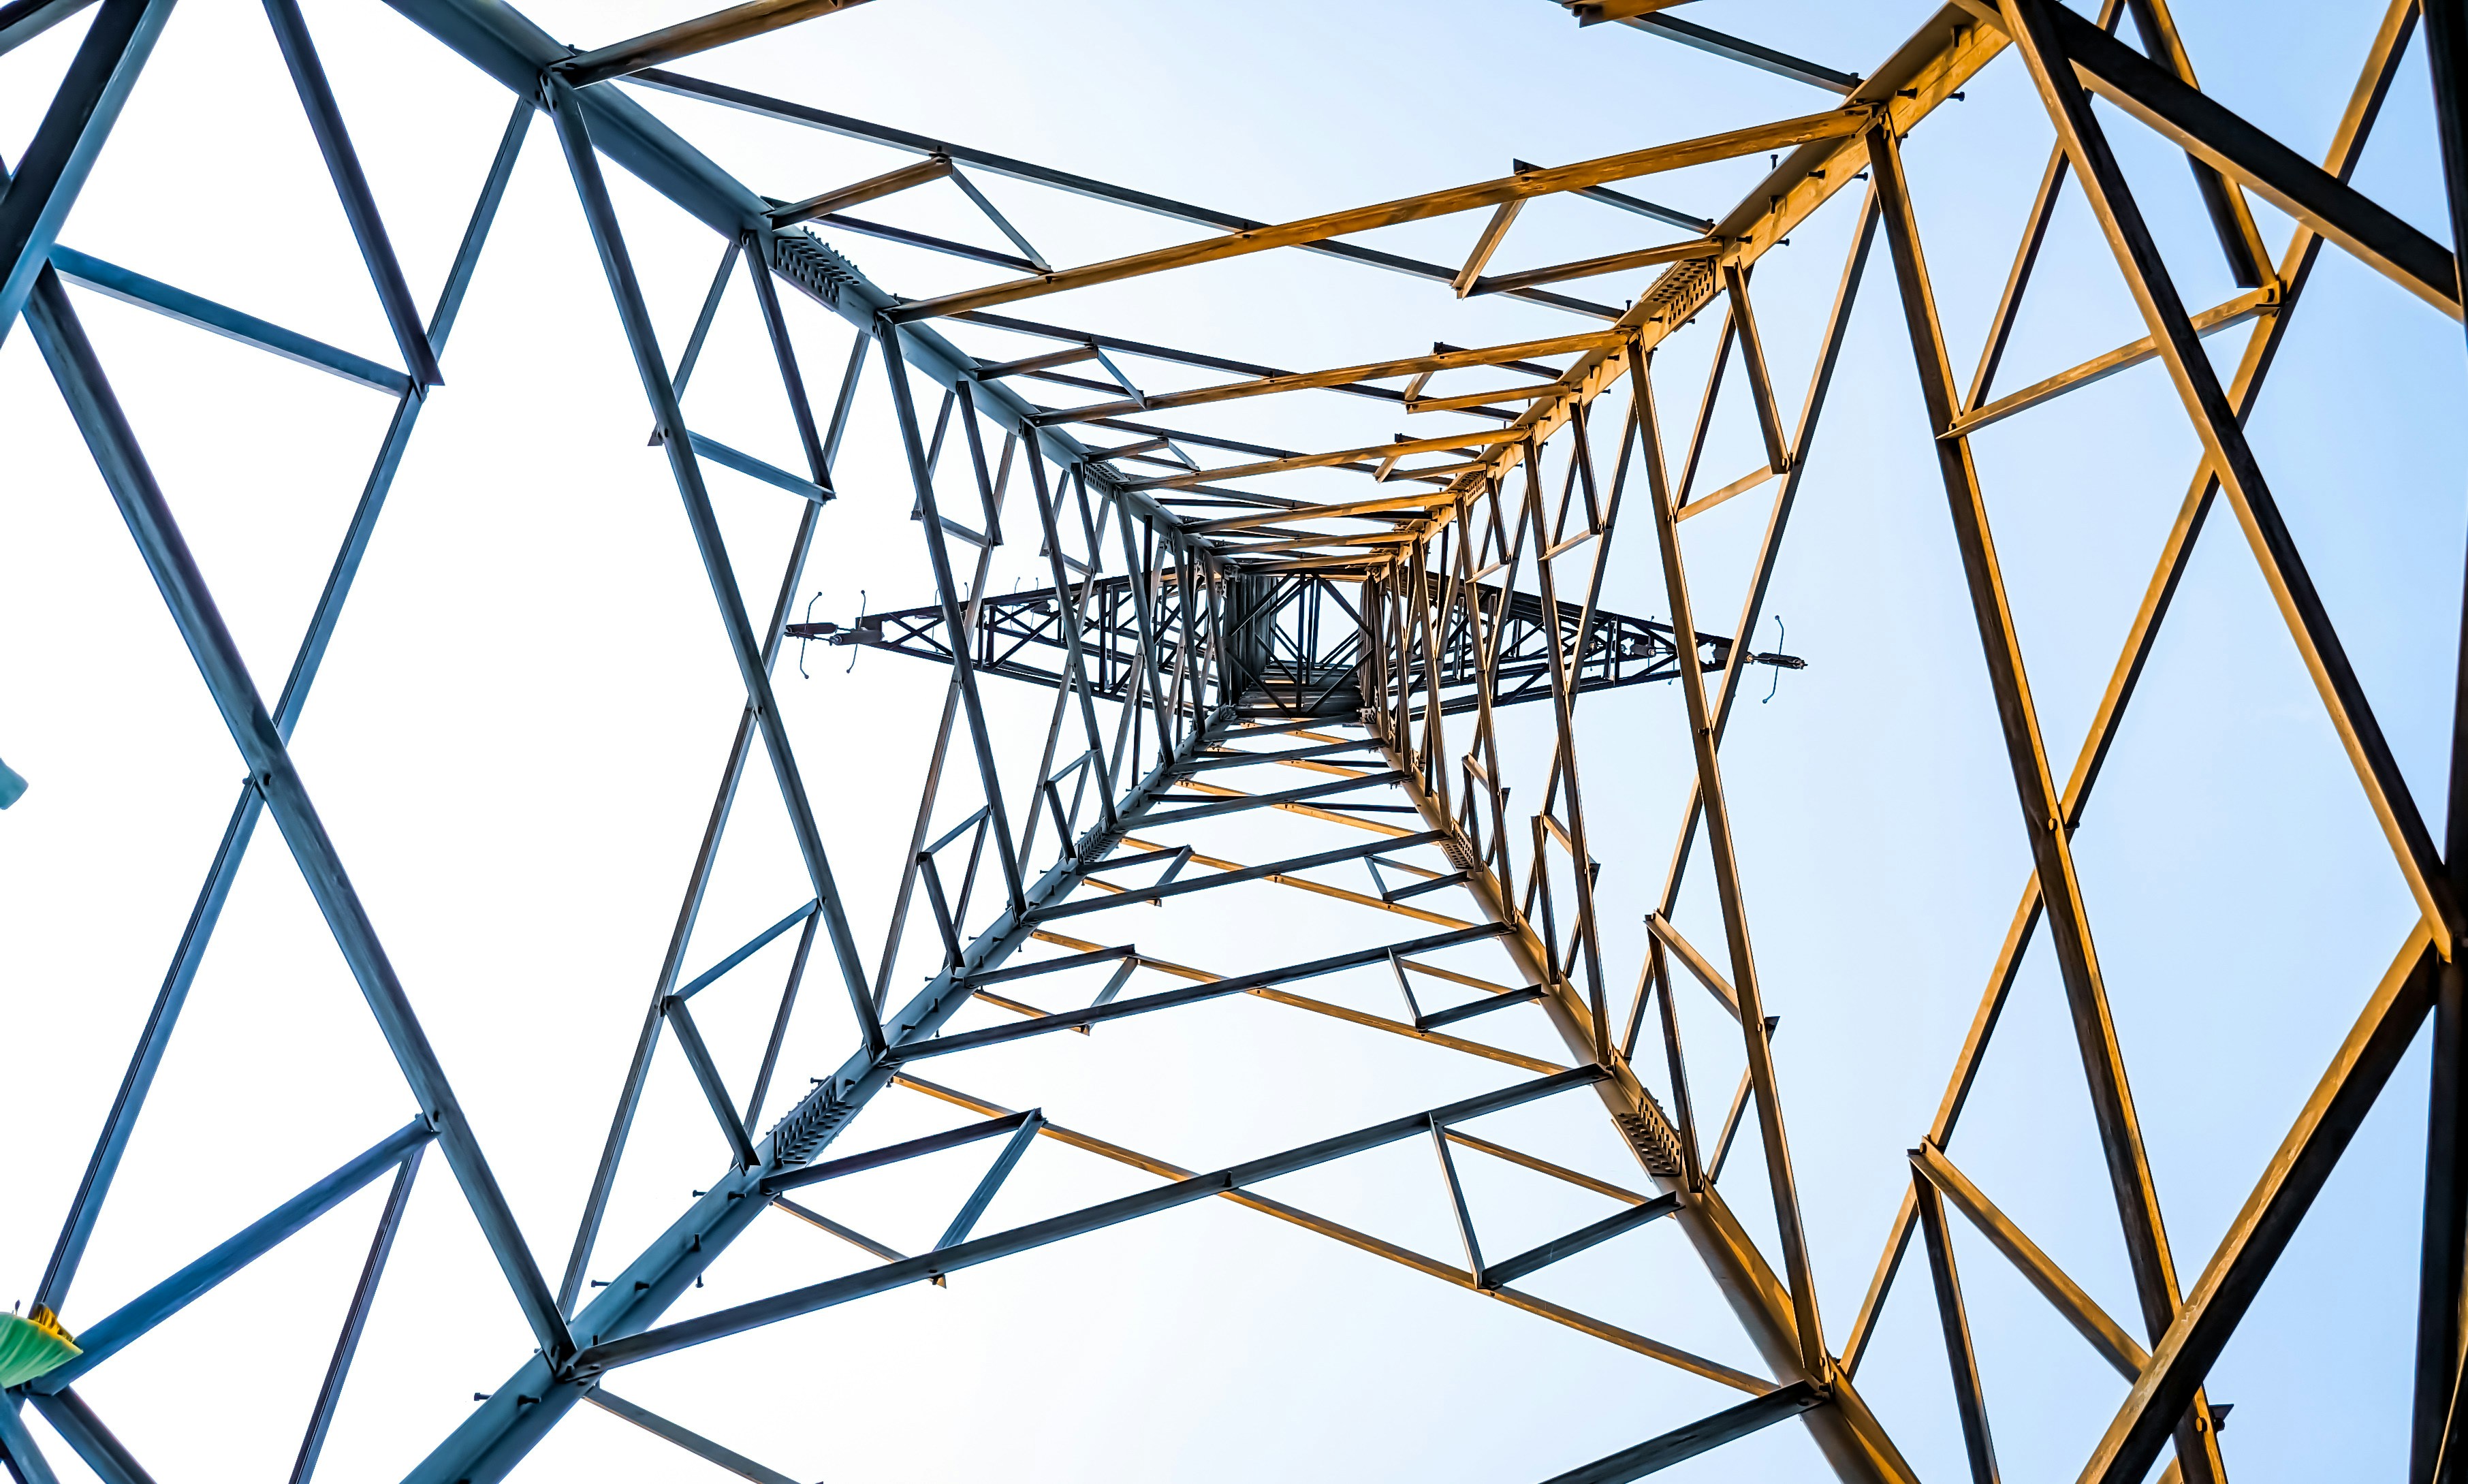 The structure of the high-voltage power pylon viewed from below